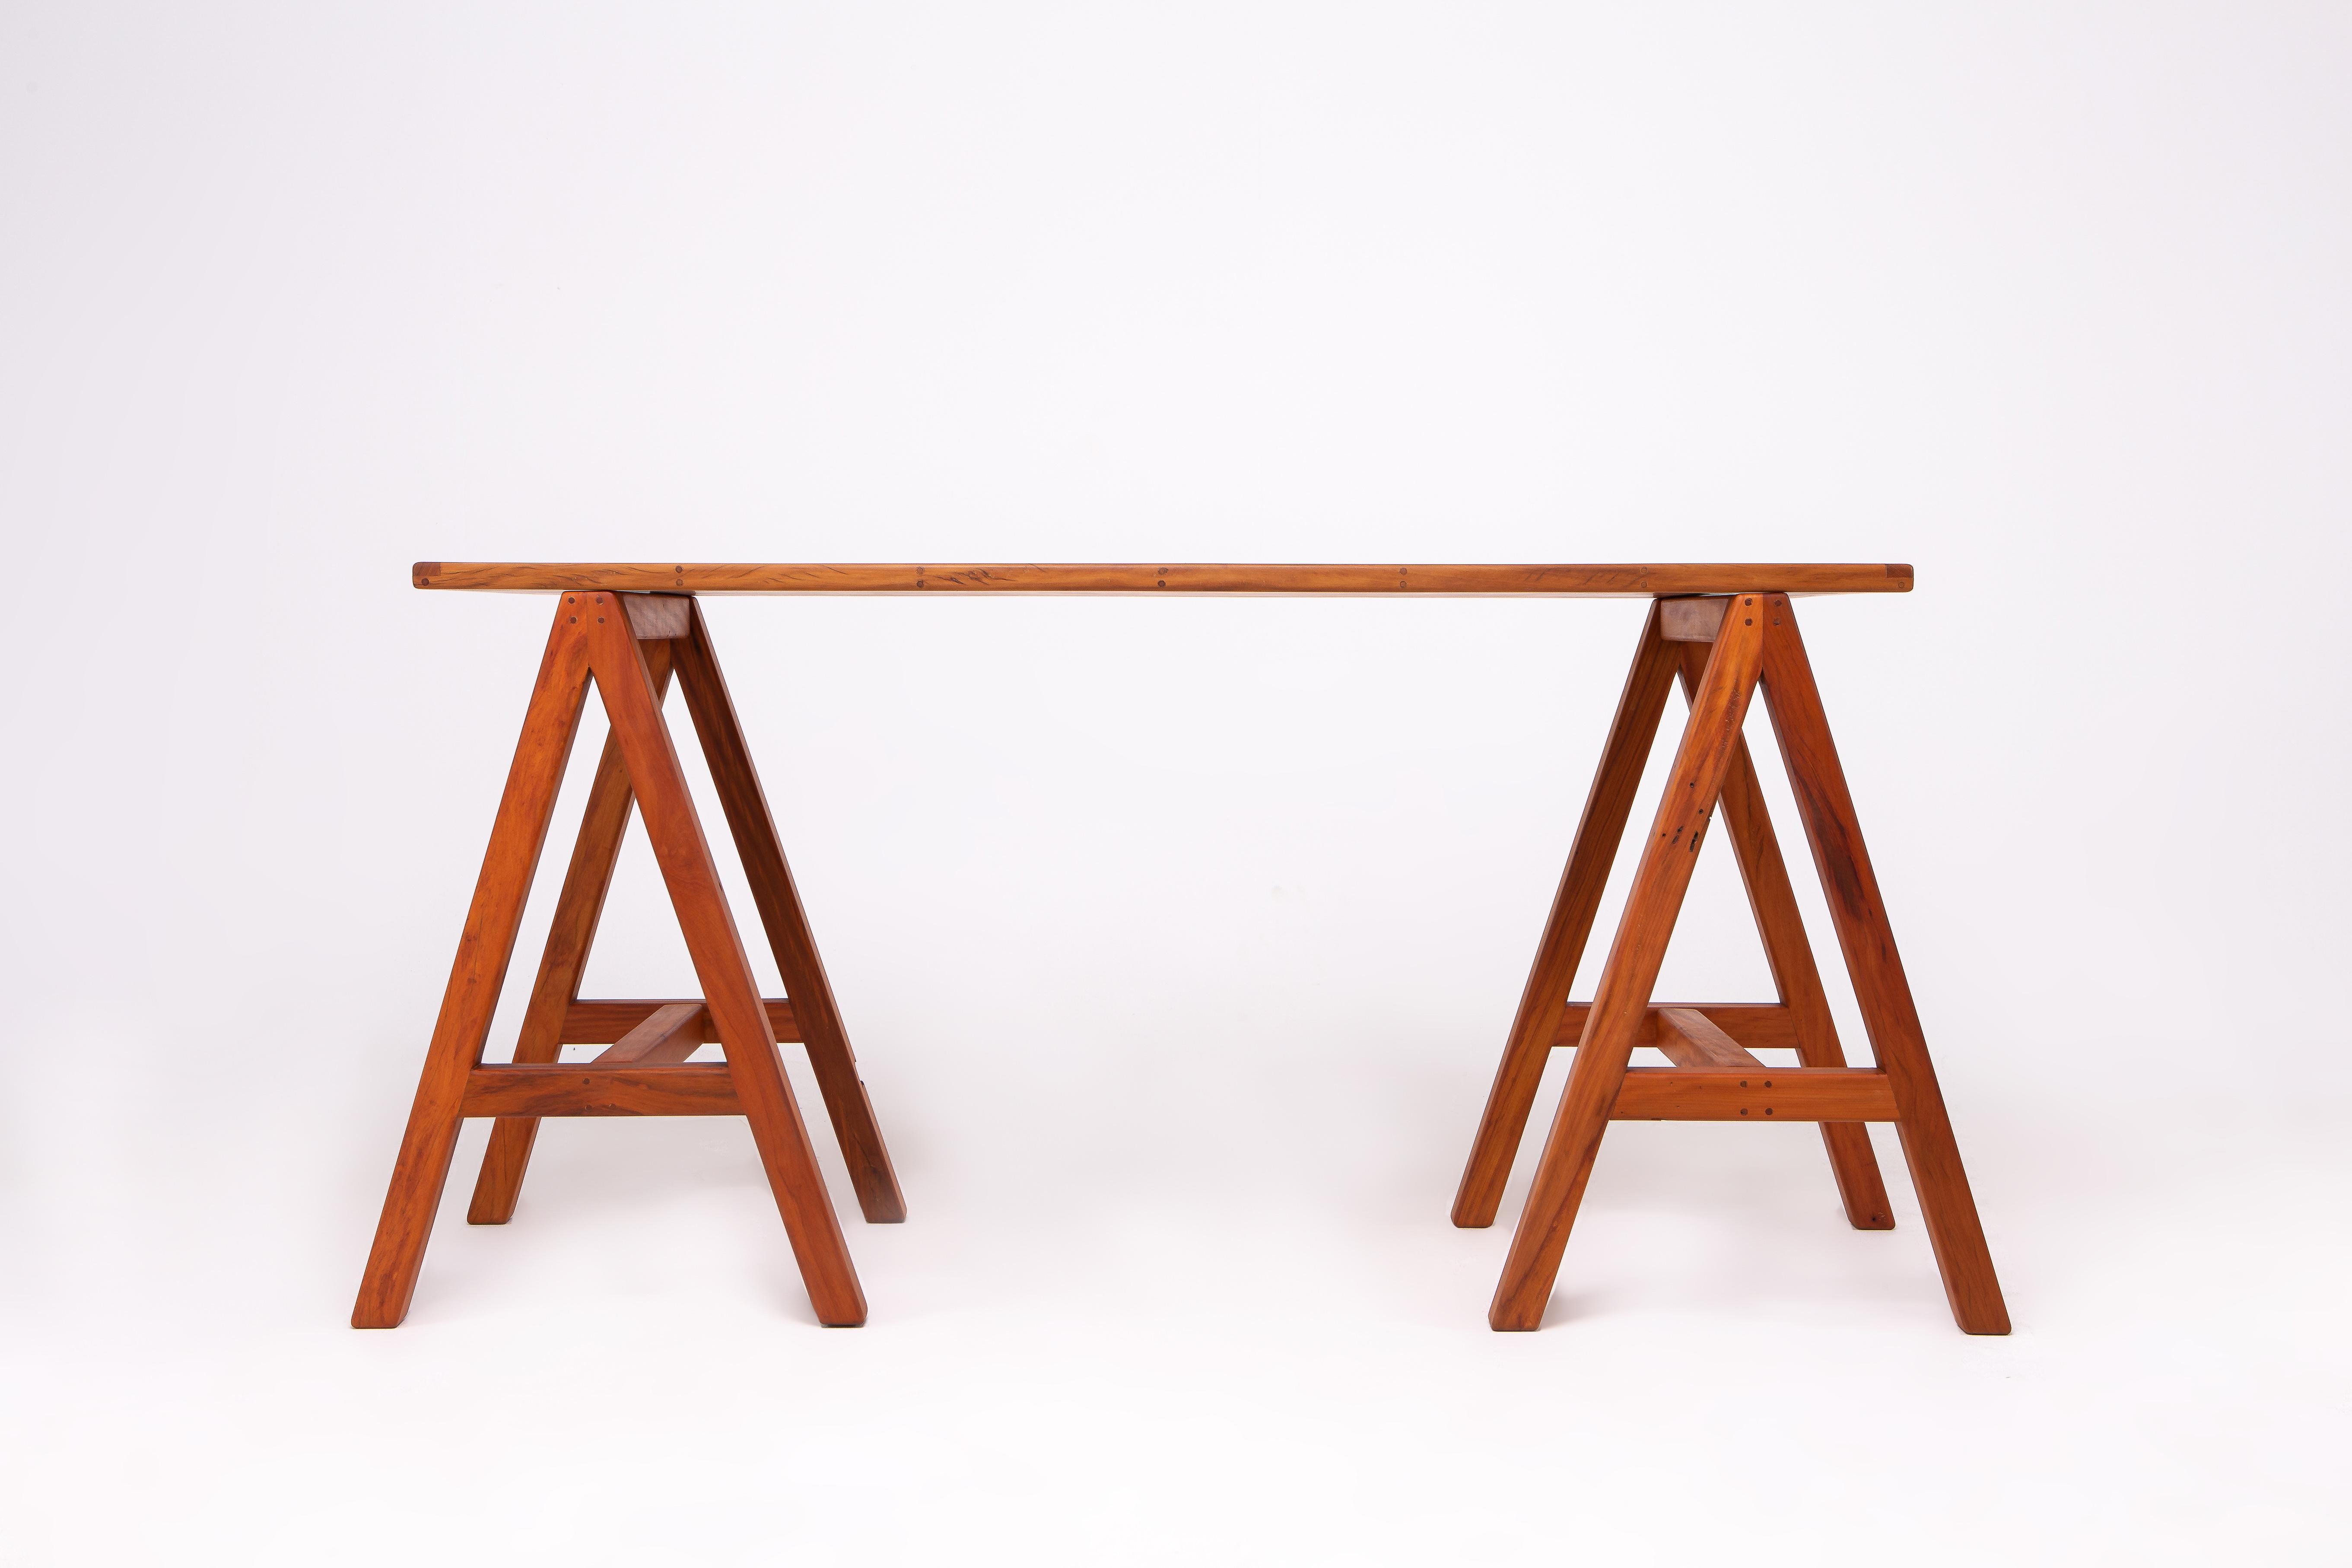 Glória is a minimal working desk designed to offer great usability and pleasure.

The aesthetics proposes a clean yet strong approach using the classic trestle structural system.

The whole piece, including the wooden top is all solid and